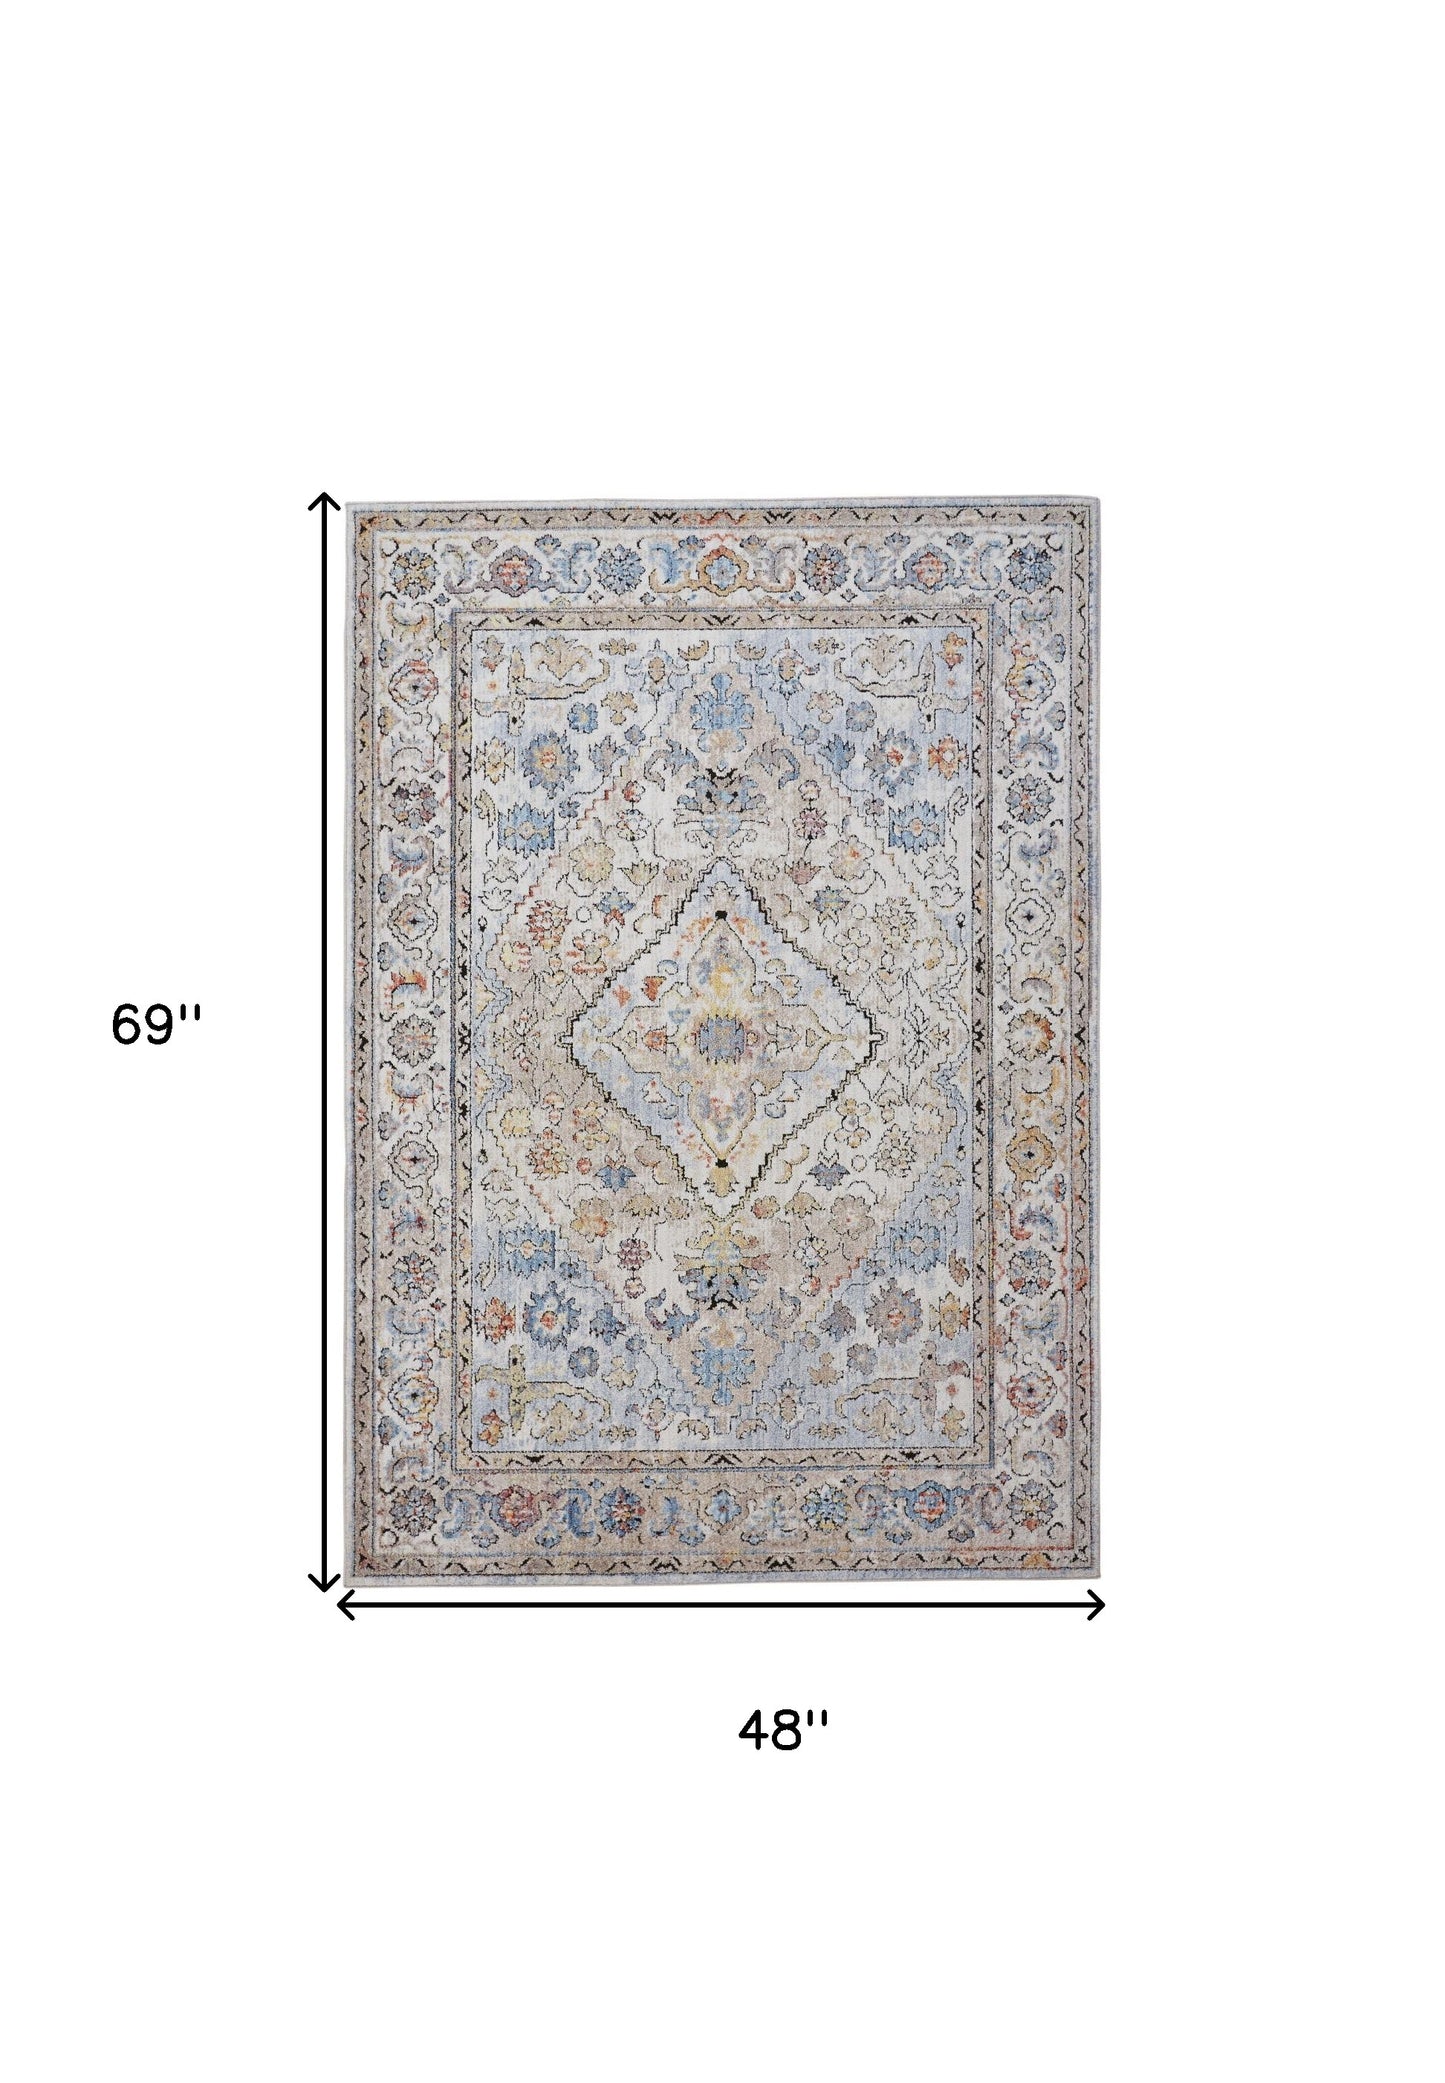 4' x 6' Blue and Gray Floral Area Rug